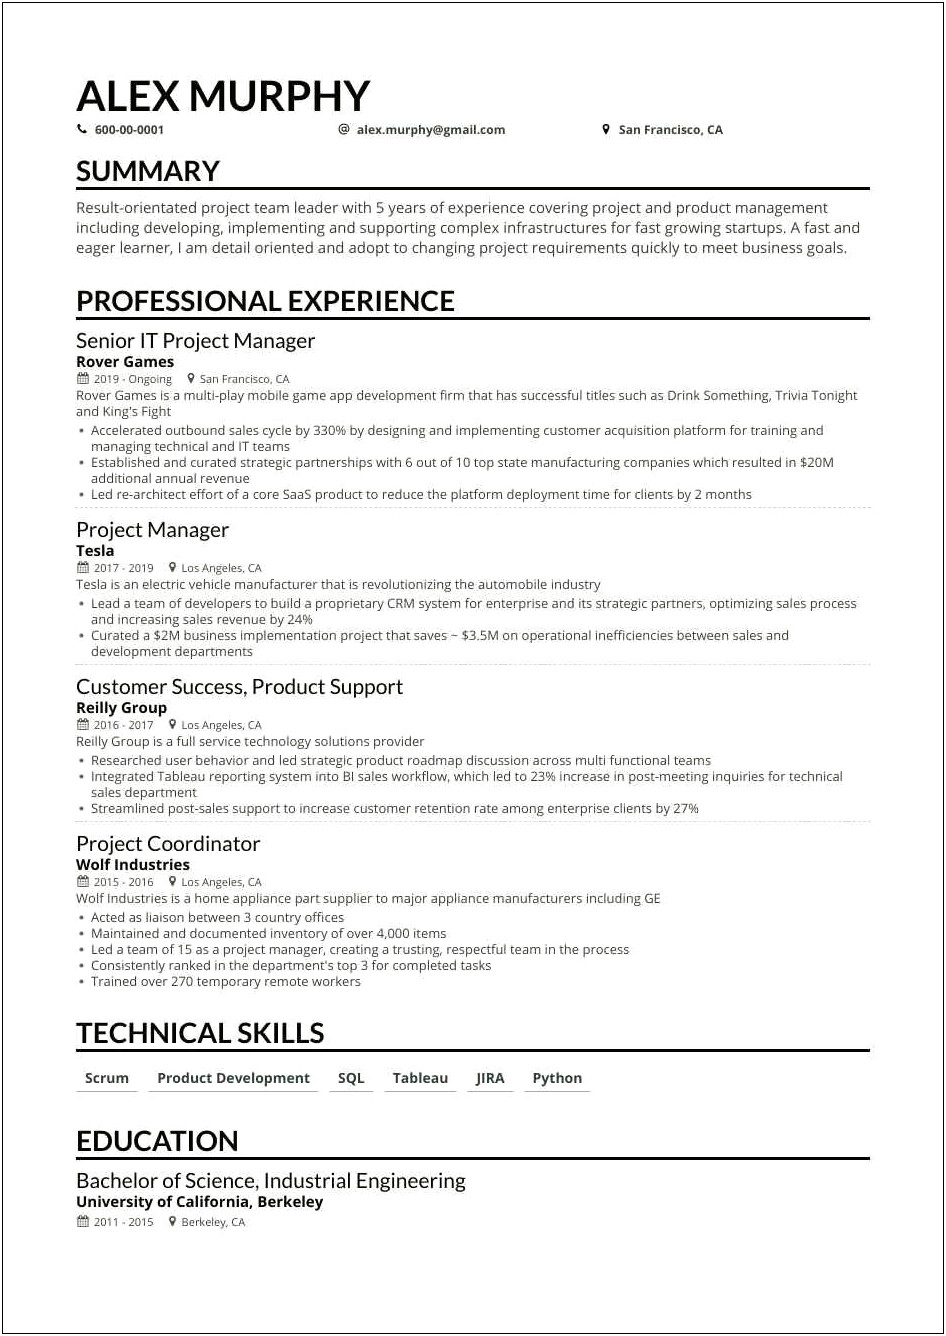 Sr Project Manager Resume Objective